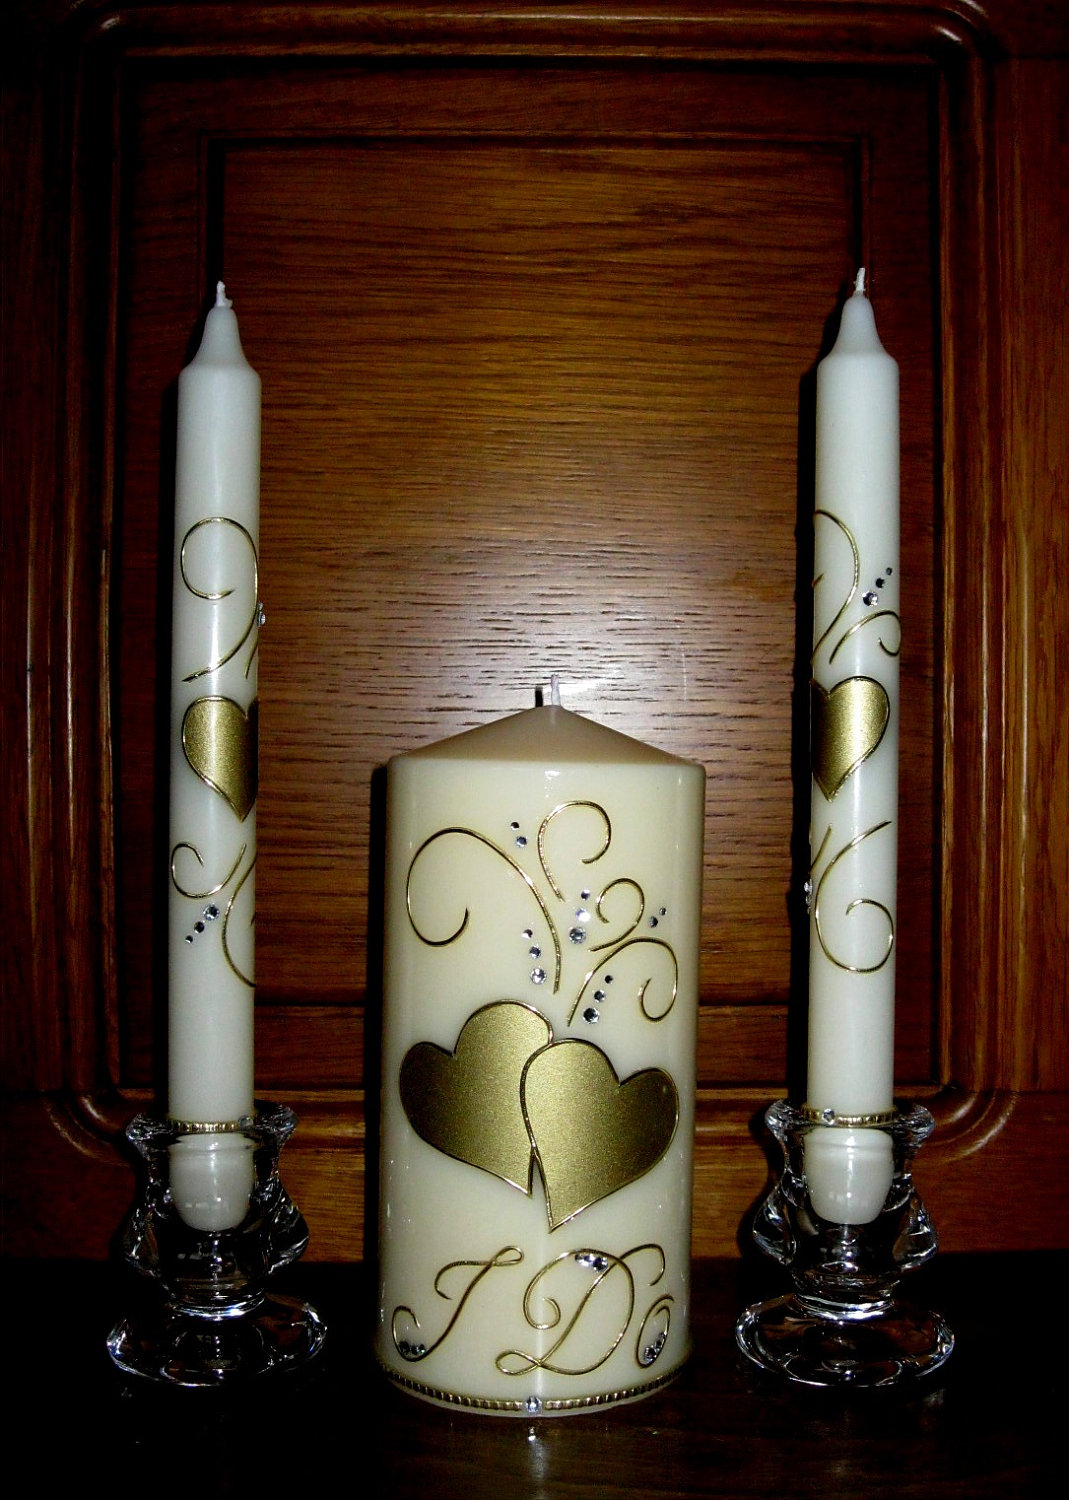 Wedding Unity Candles "i Do" Handmade, Hand Decorated , Pillar Candle, Taper Candles, Personalized Candles, Unity